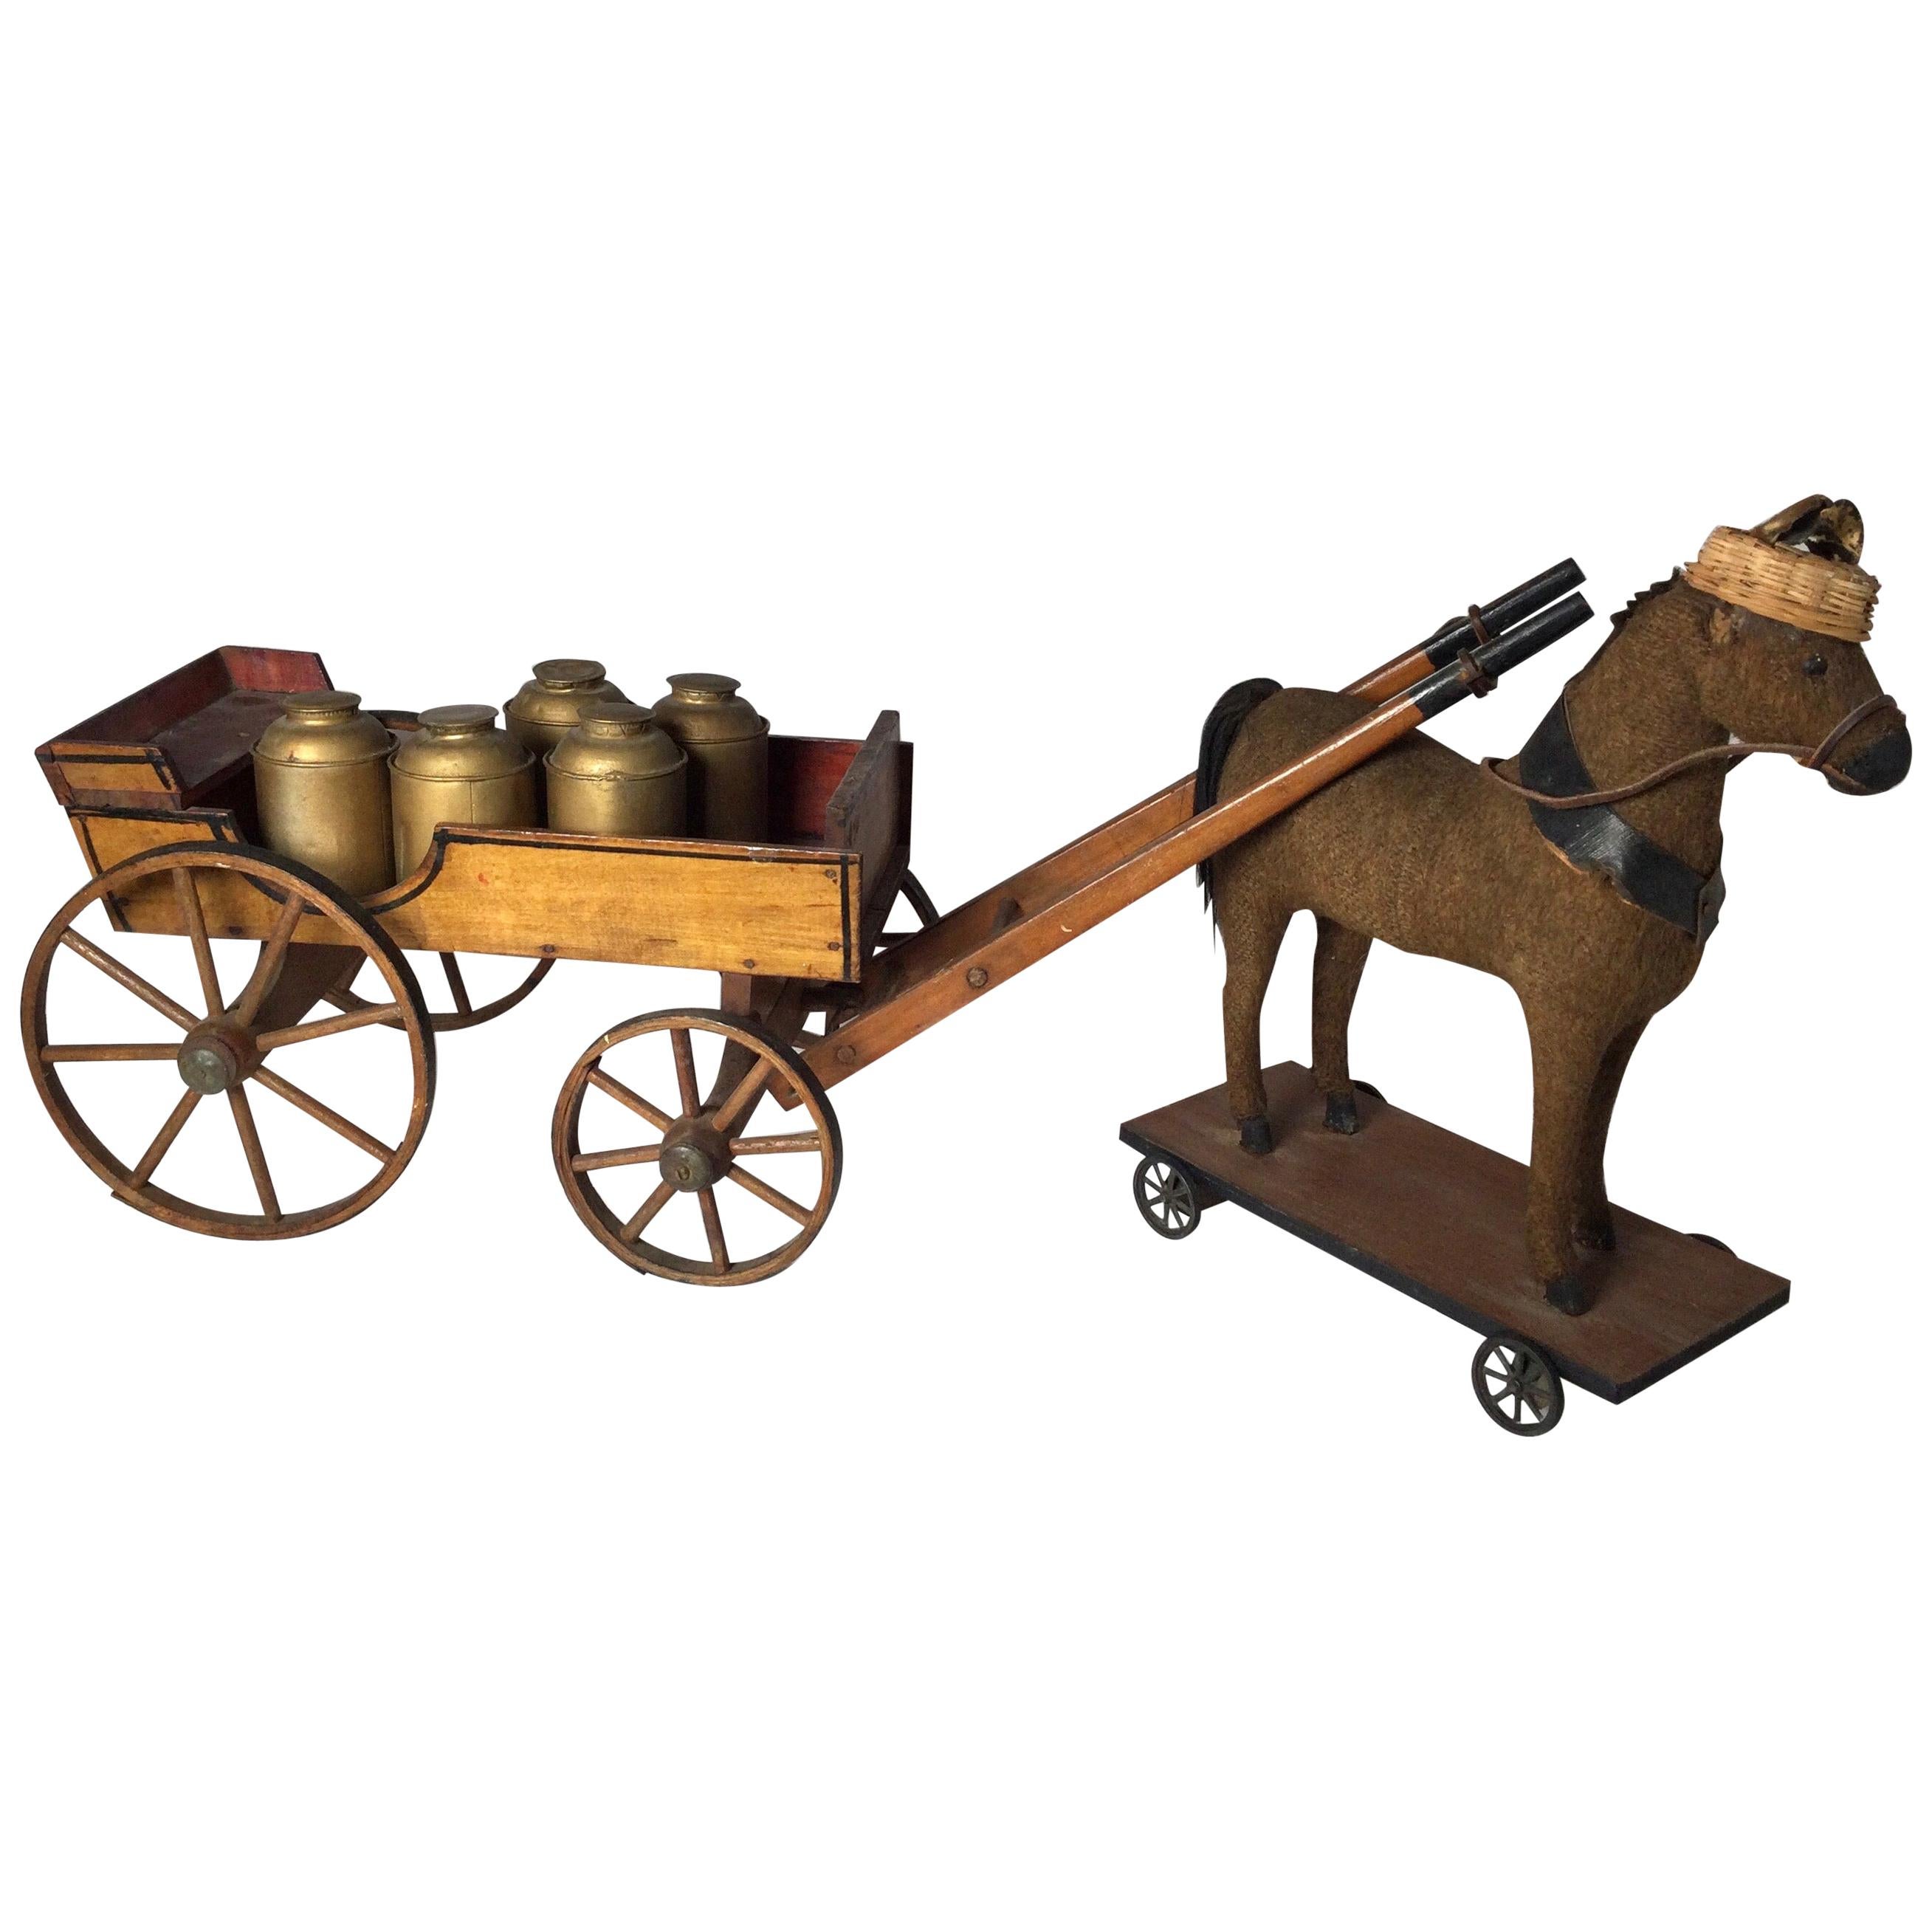 What is a wagon pulled by horses called?